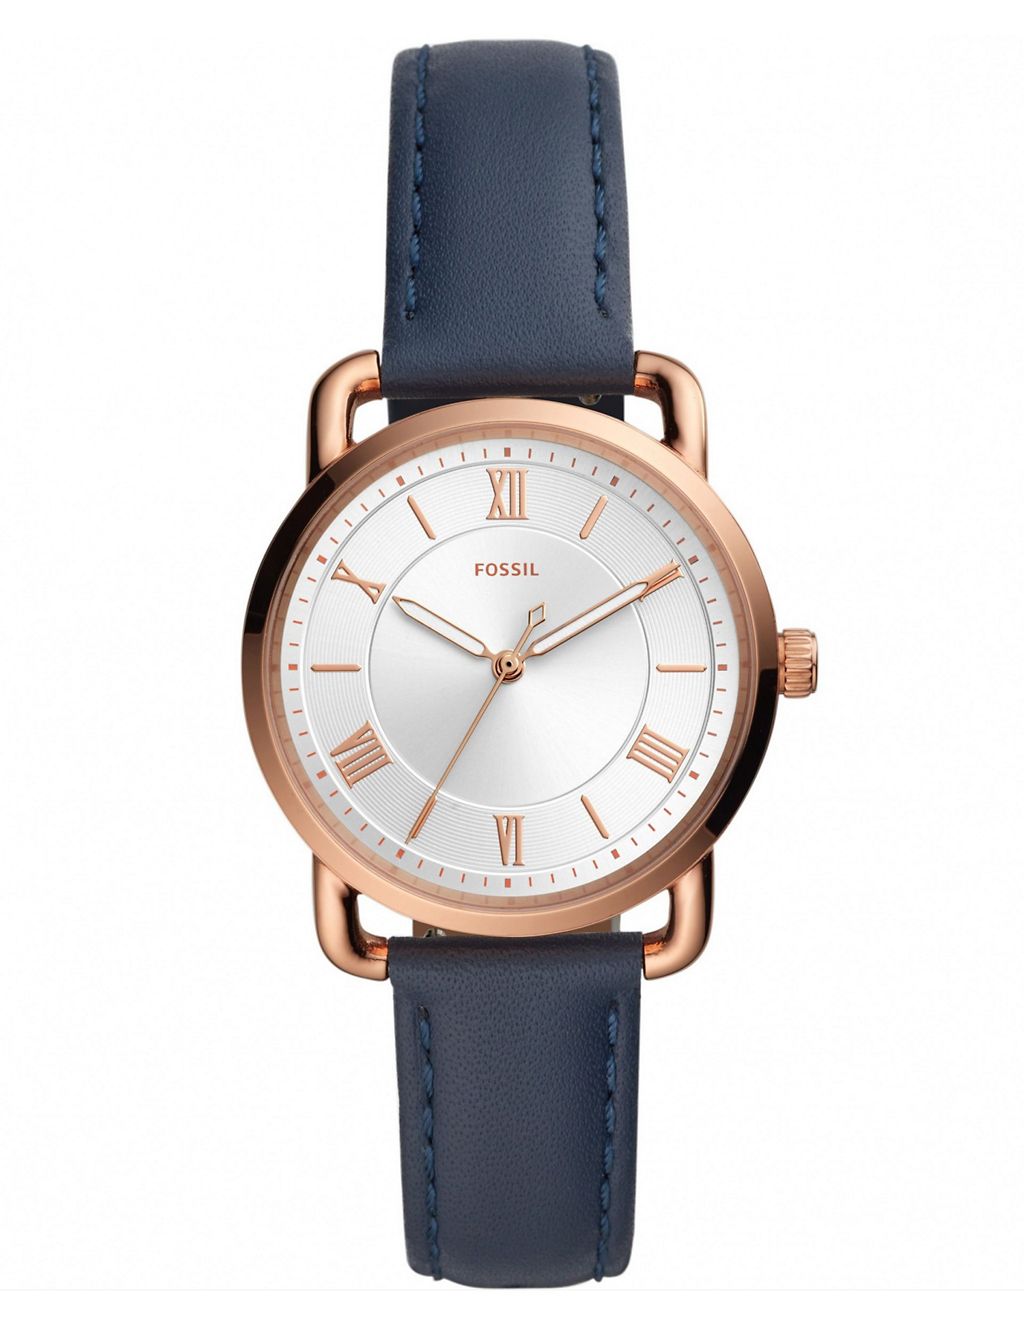 Fossil Copeland Navy Leather Quartz Watch 3 of 5